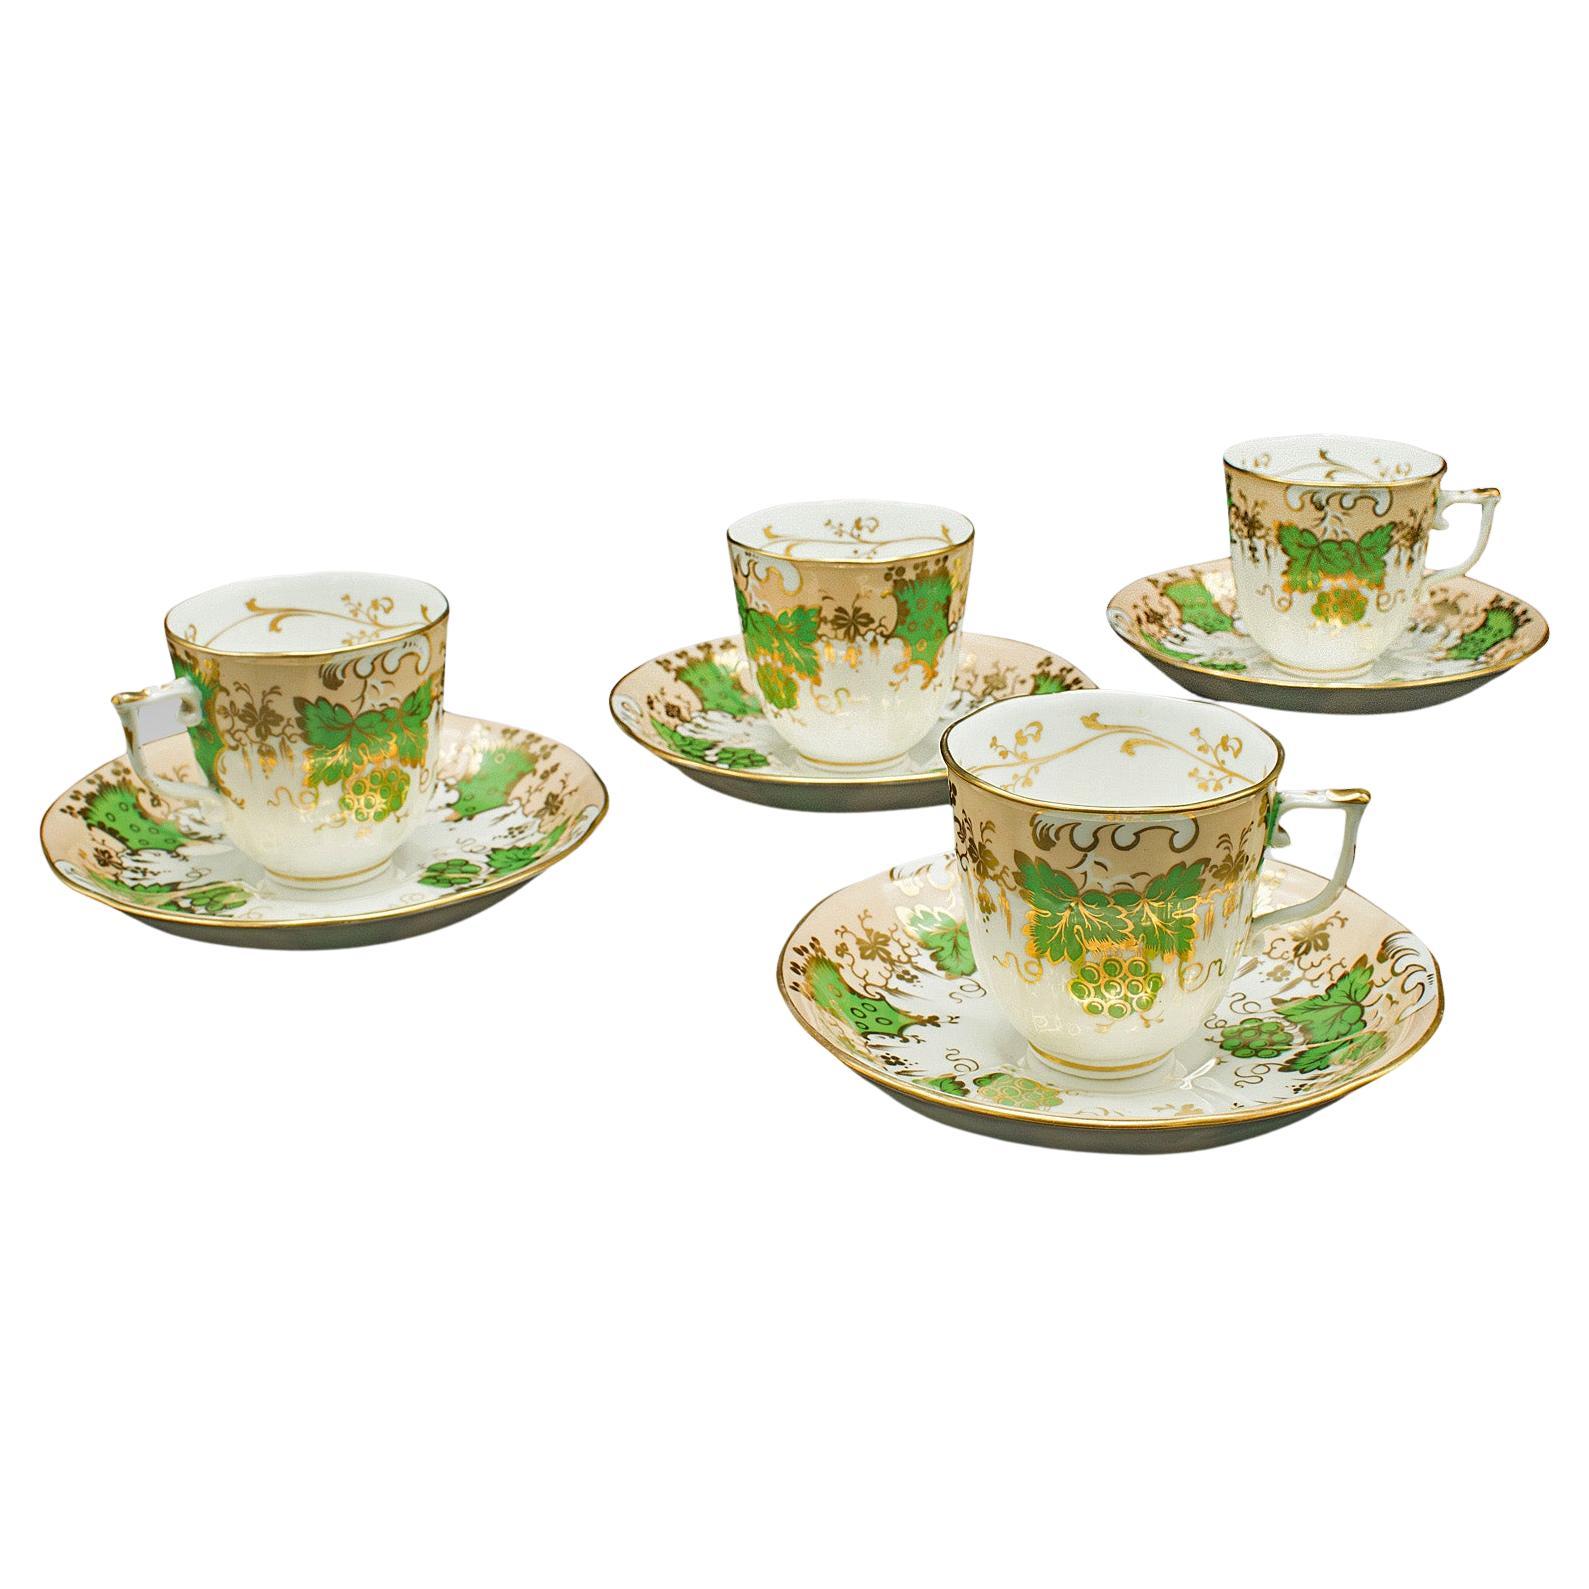 Set of 4 Antique Coffee Cups, English, Bone China, Cup and Saucer, Victorian For Sale